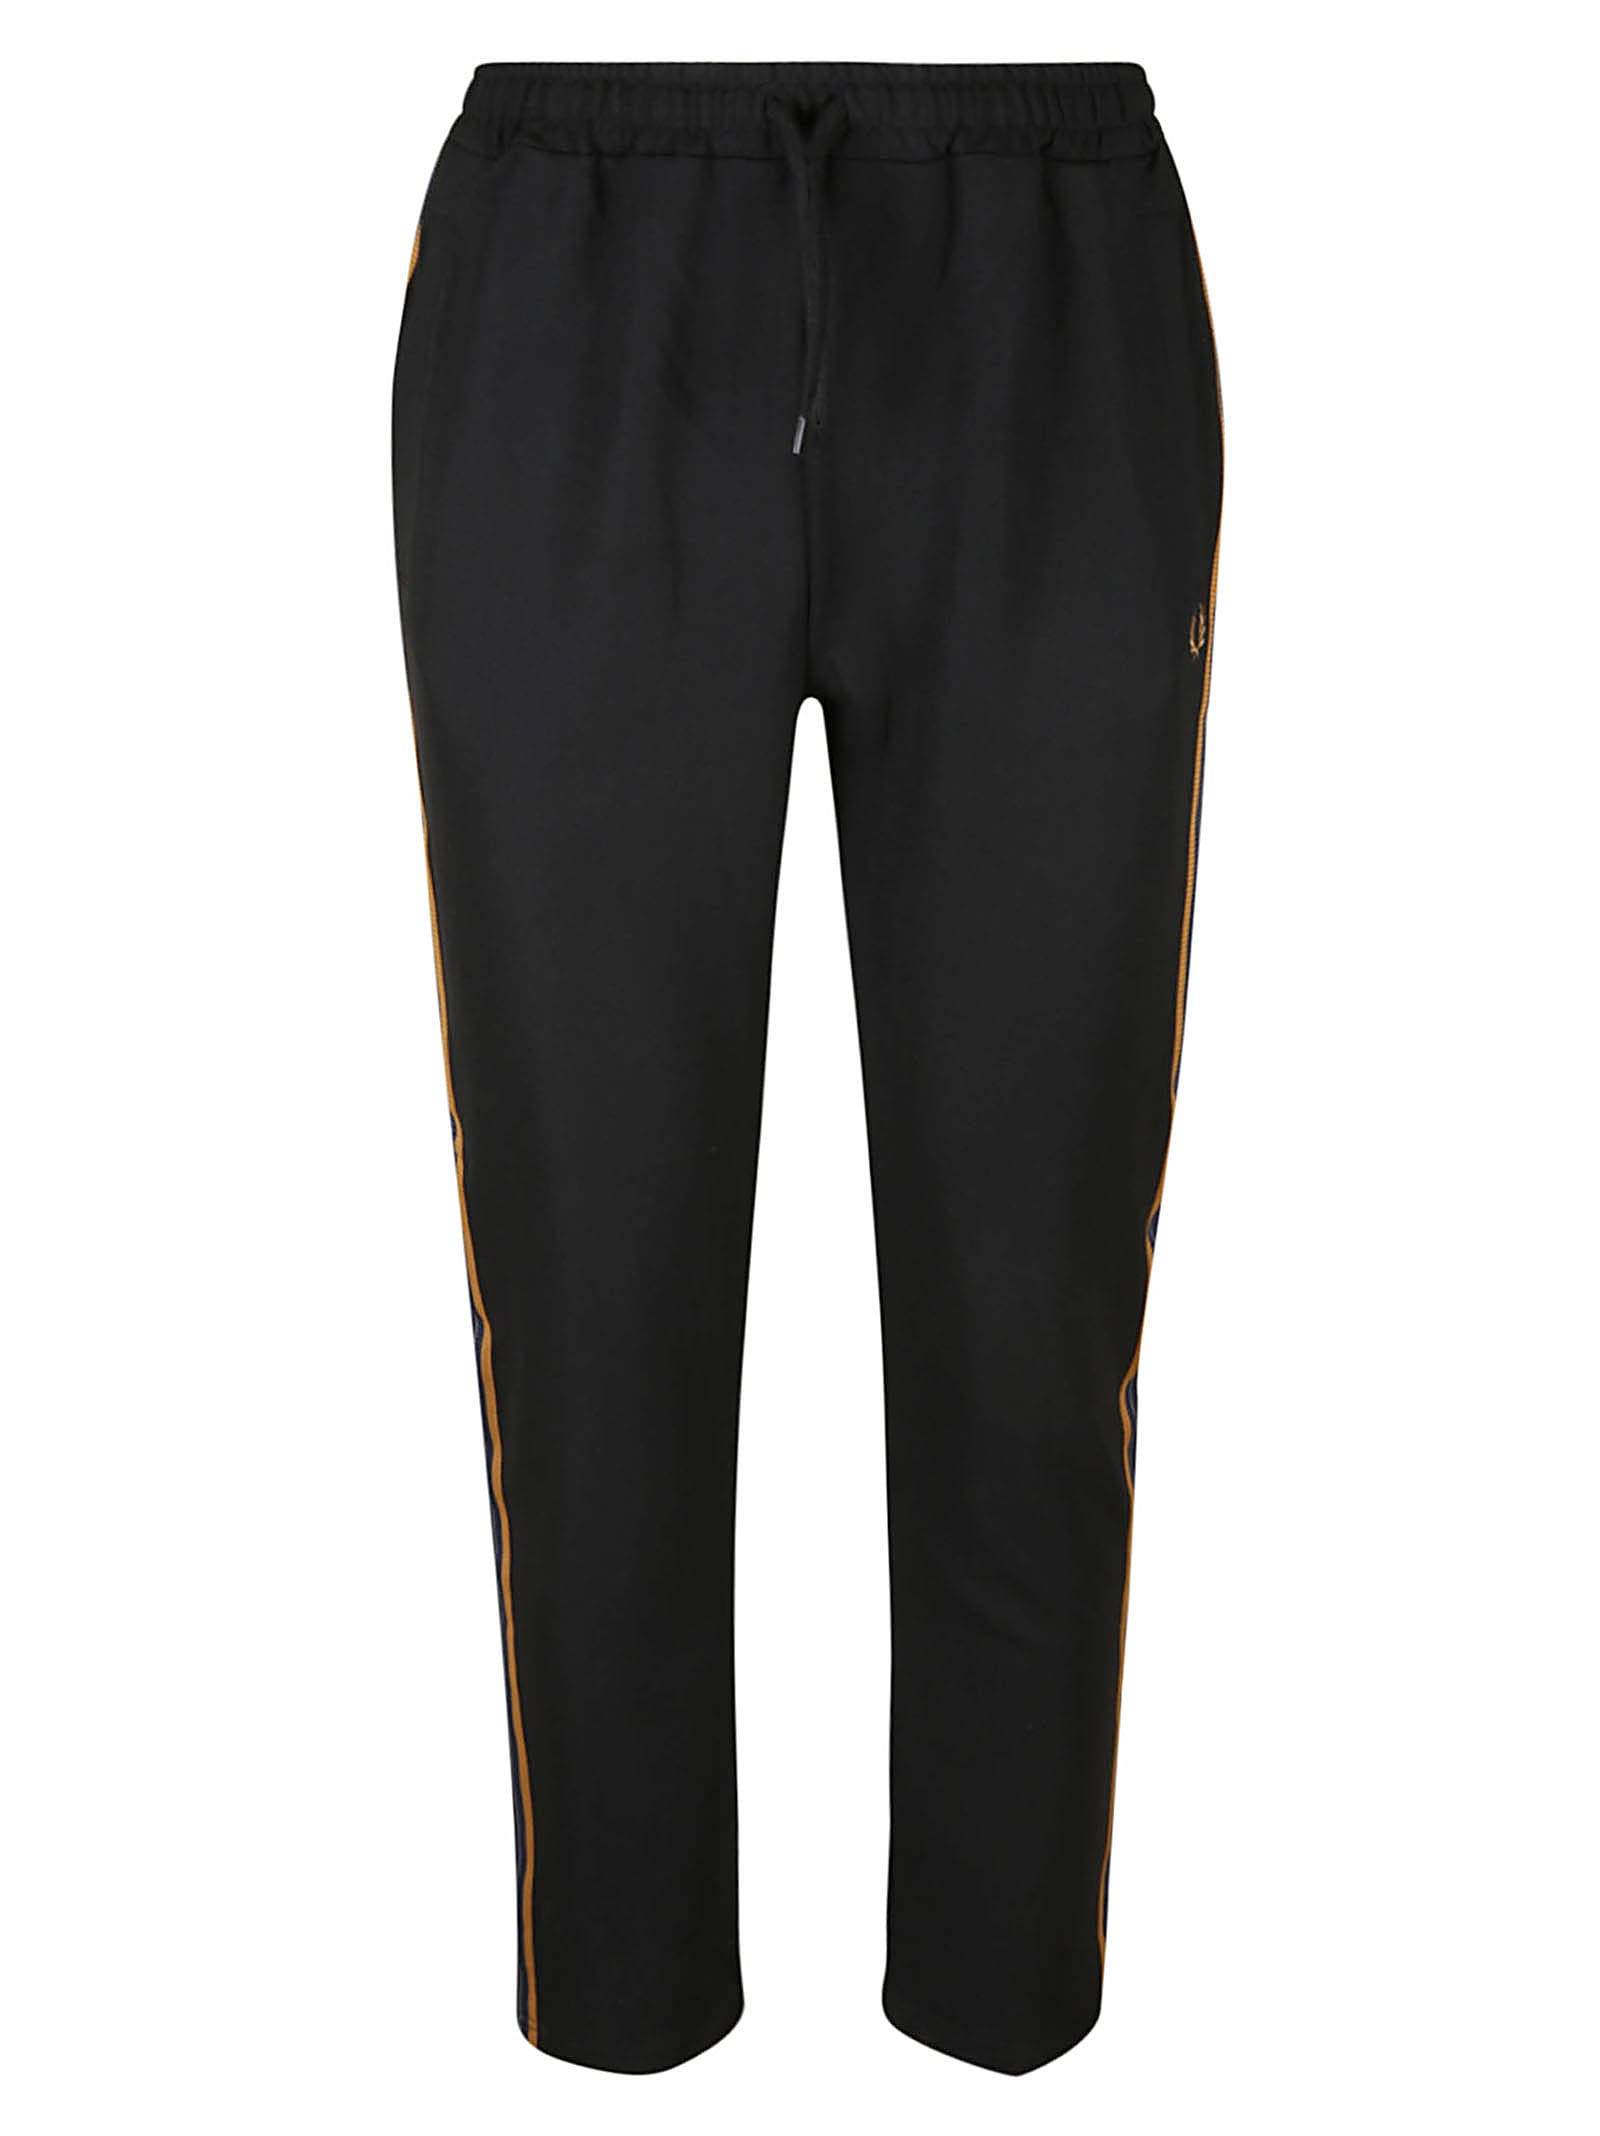 Fred Perry Striped Tape Track Pants